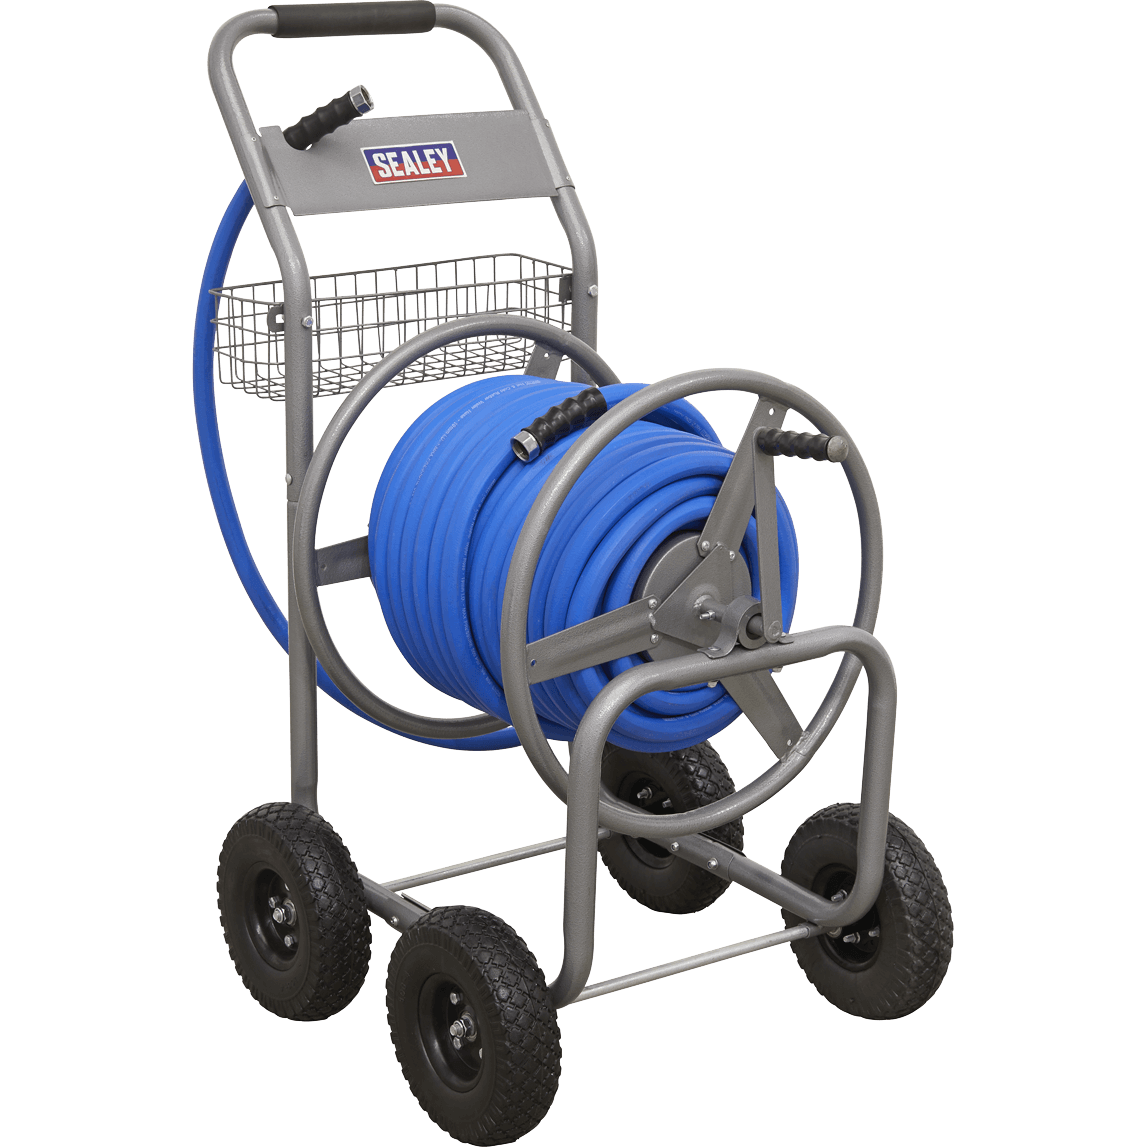 Sealey Hot and Cold Water Rubber Heavy Duty Hose Reel Cart 3/4" / 19mm 50m Blue